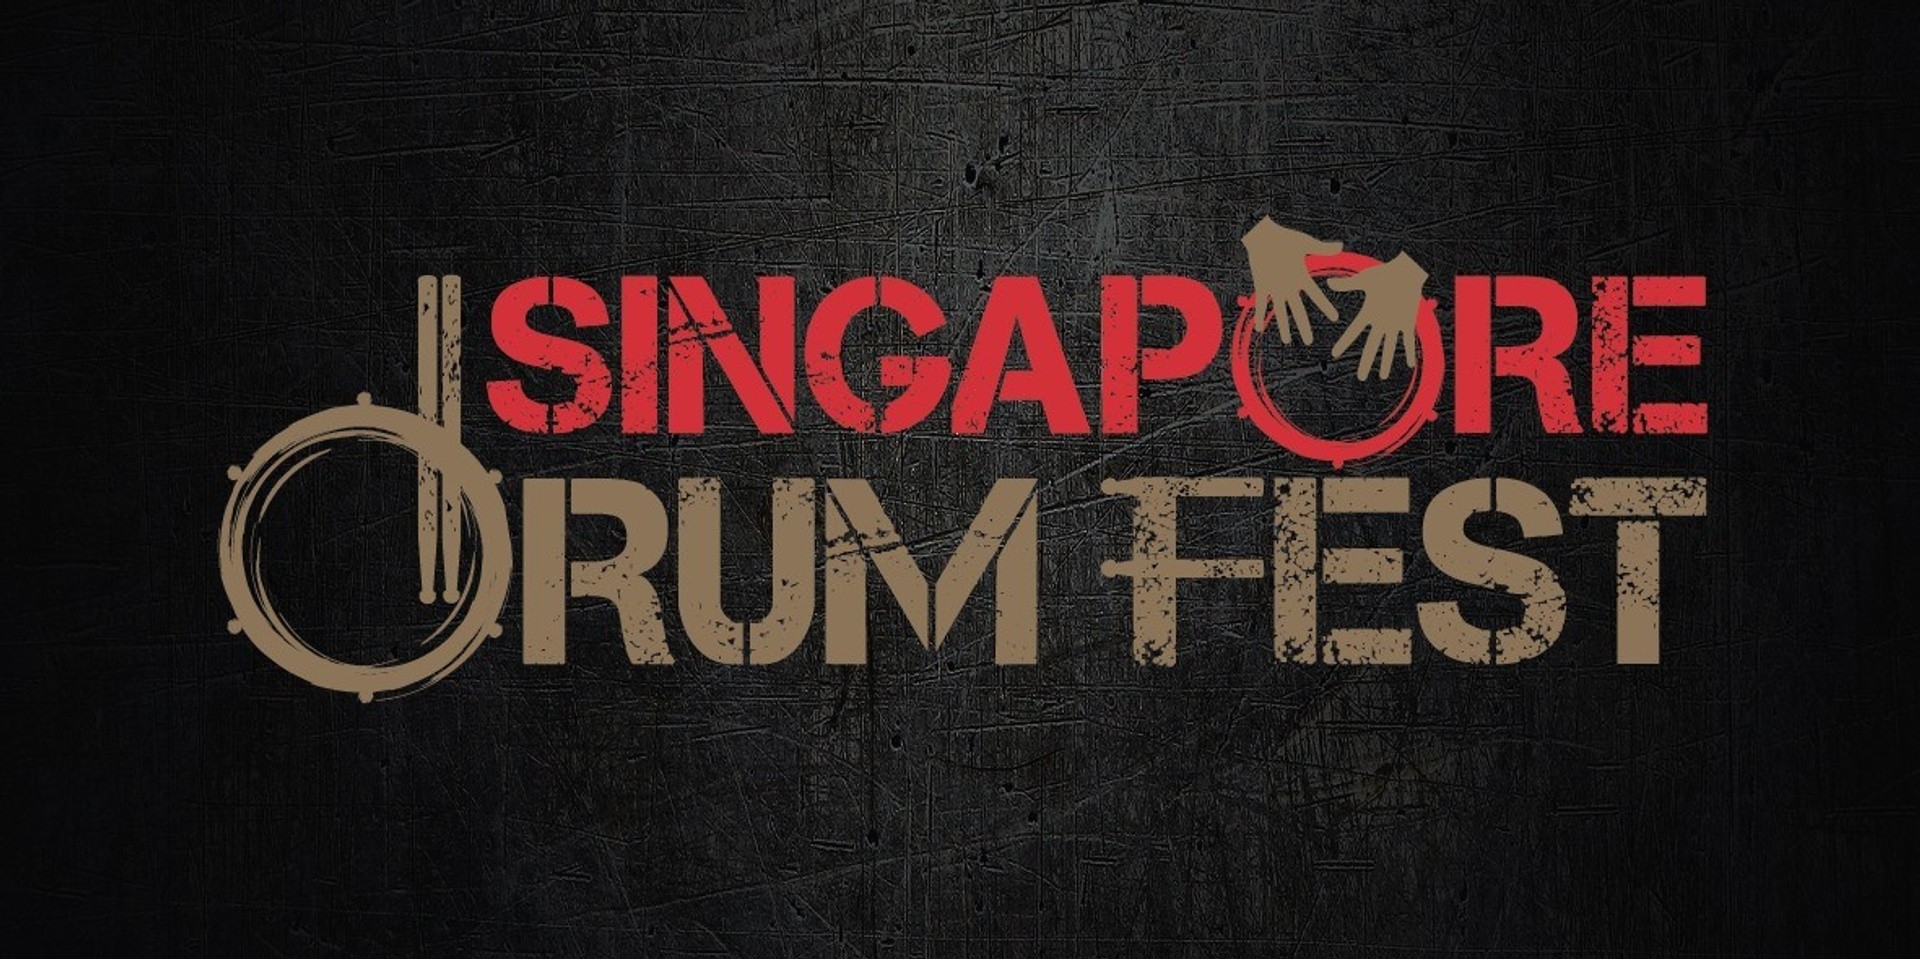 Singapore Drum Fest lines up world-class drummers for their 'Ultimate Weekend' extravaganza